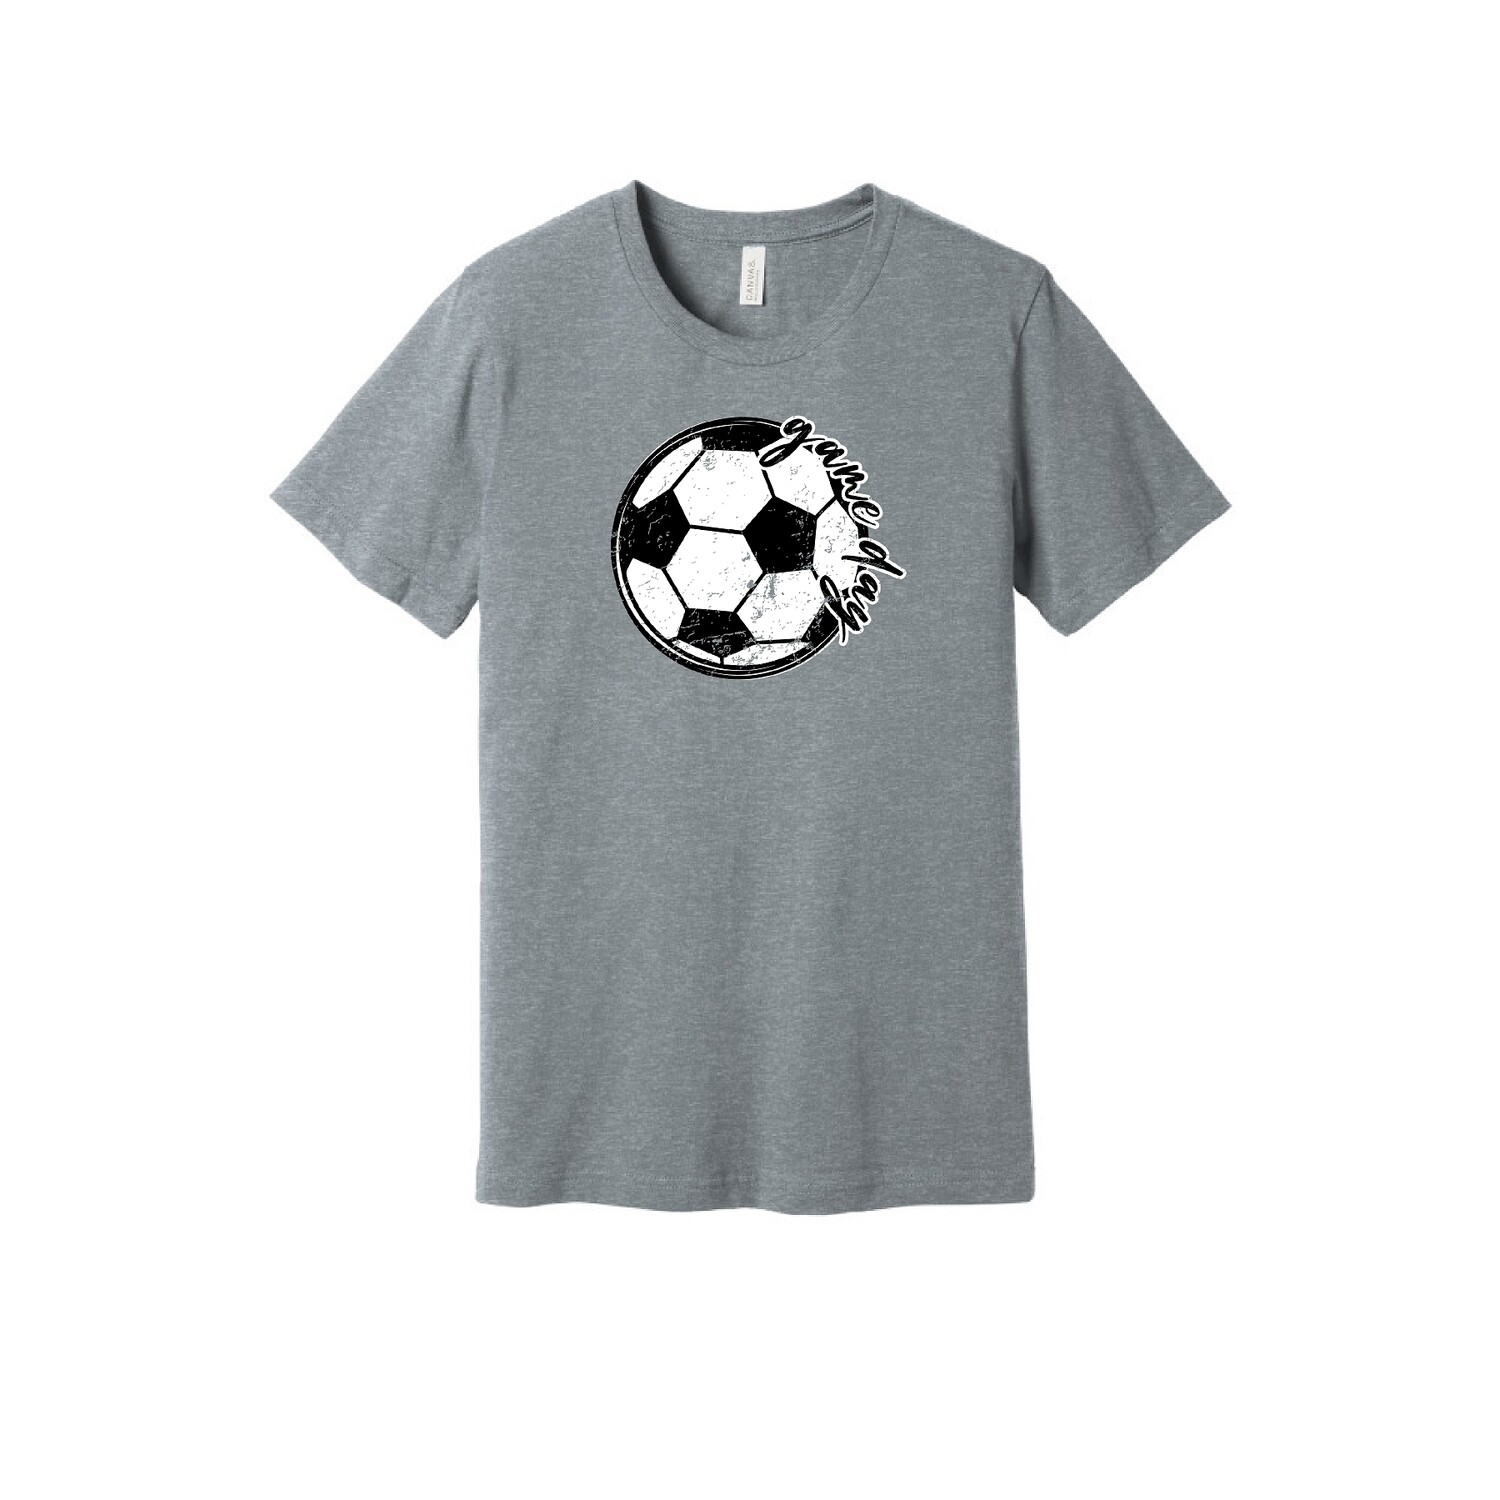 Adult Unisex Game Day - Soccer, Style: T-Shirt